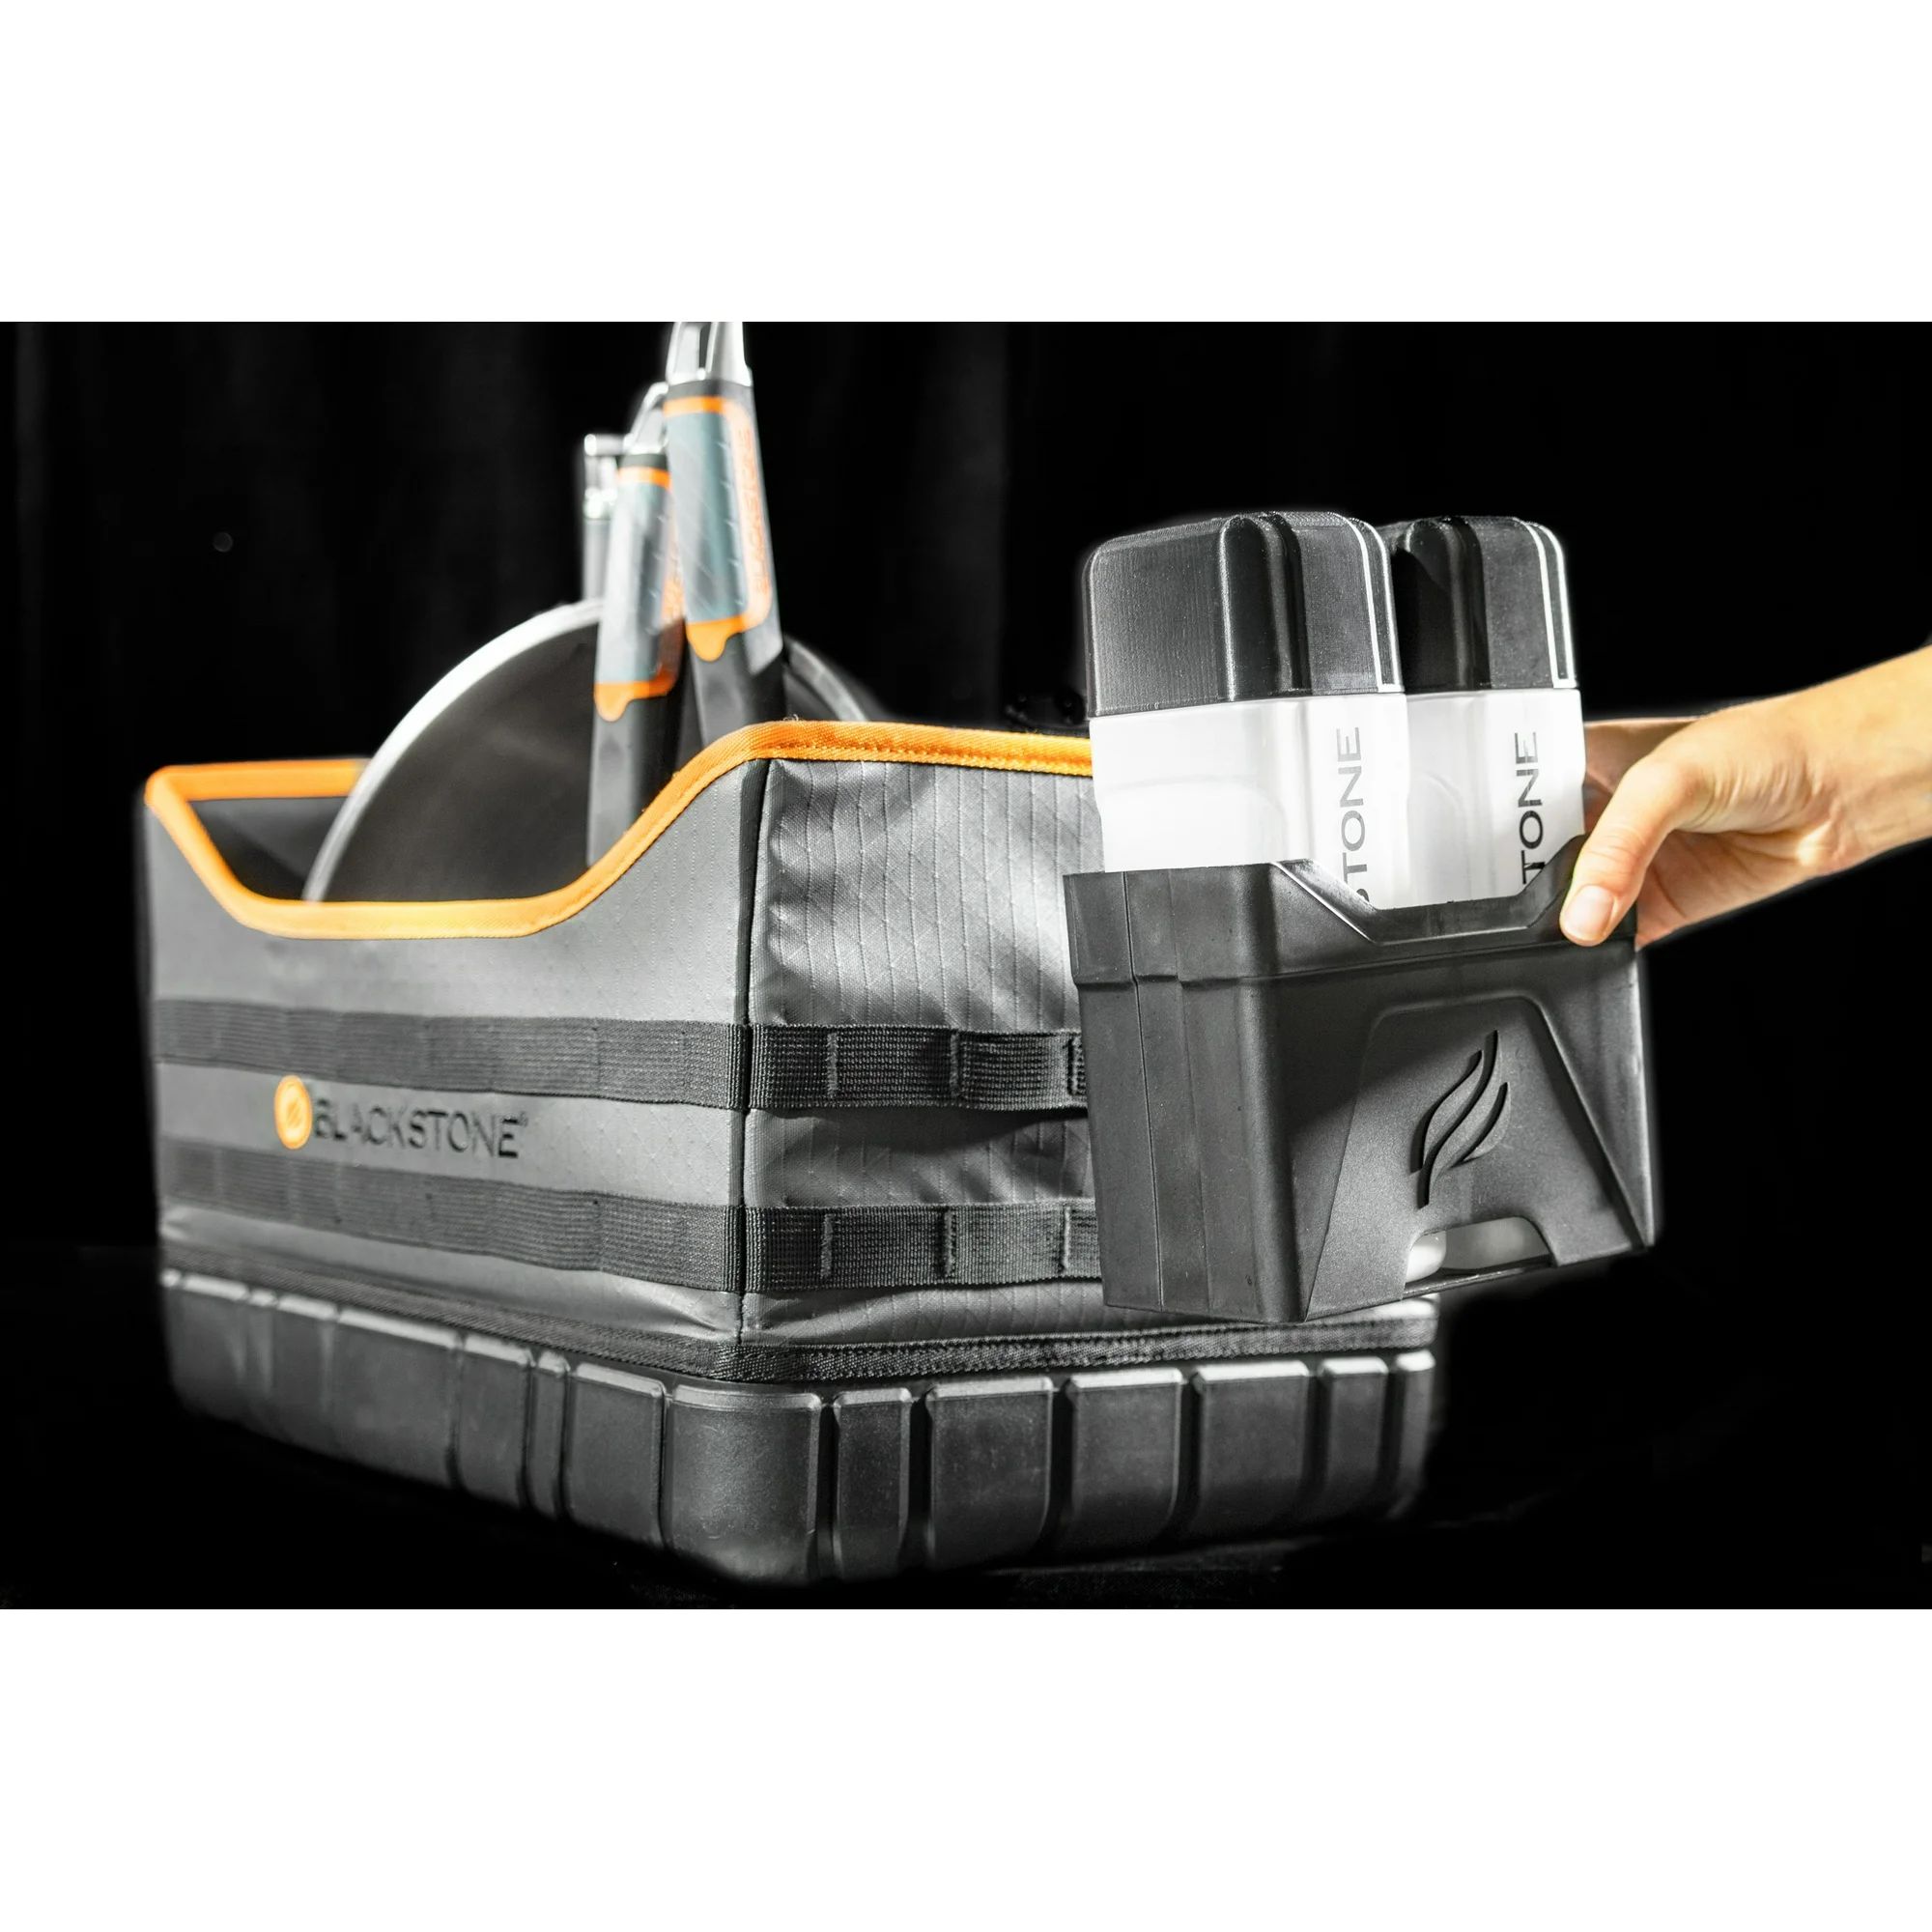 Blackstone Cook and Carry Griddle Caddy for Griddle, Grill Tools | Walmart (US)